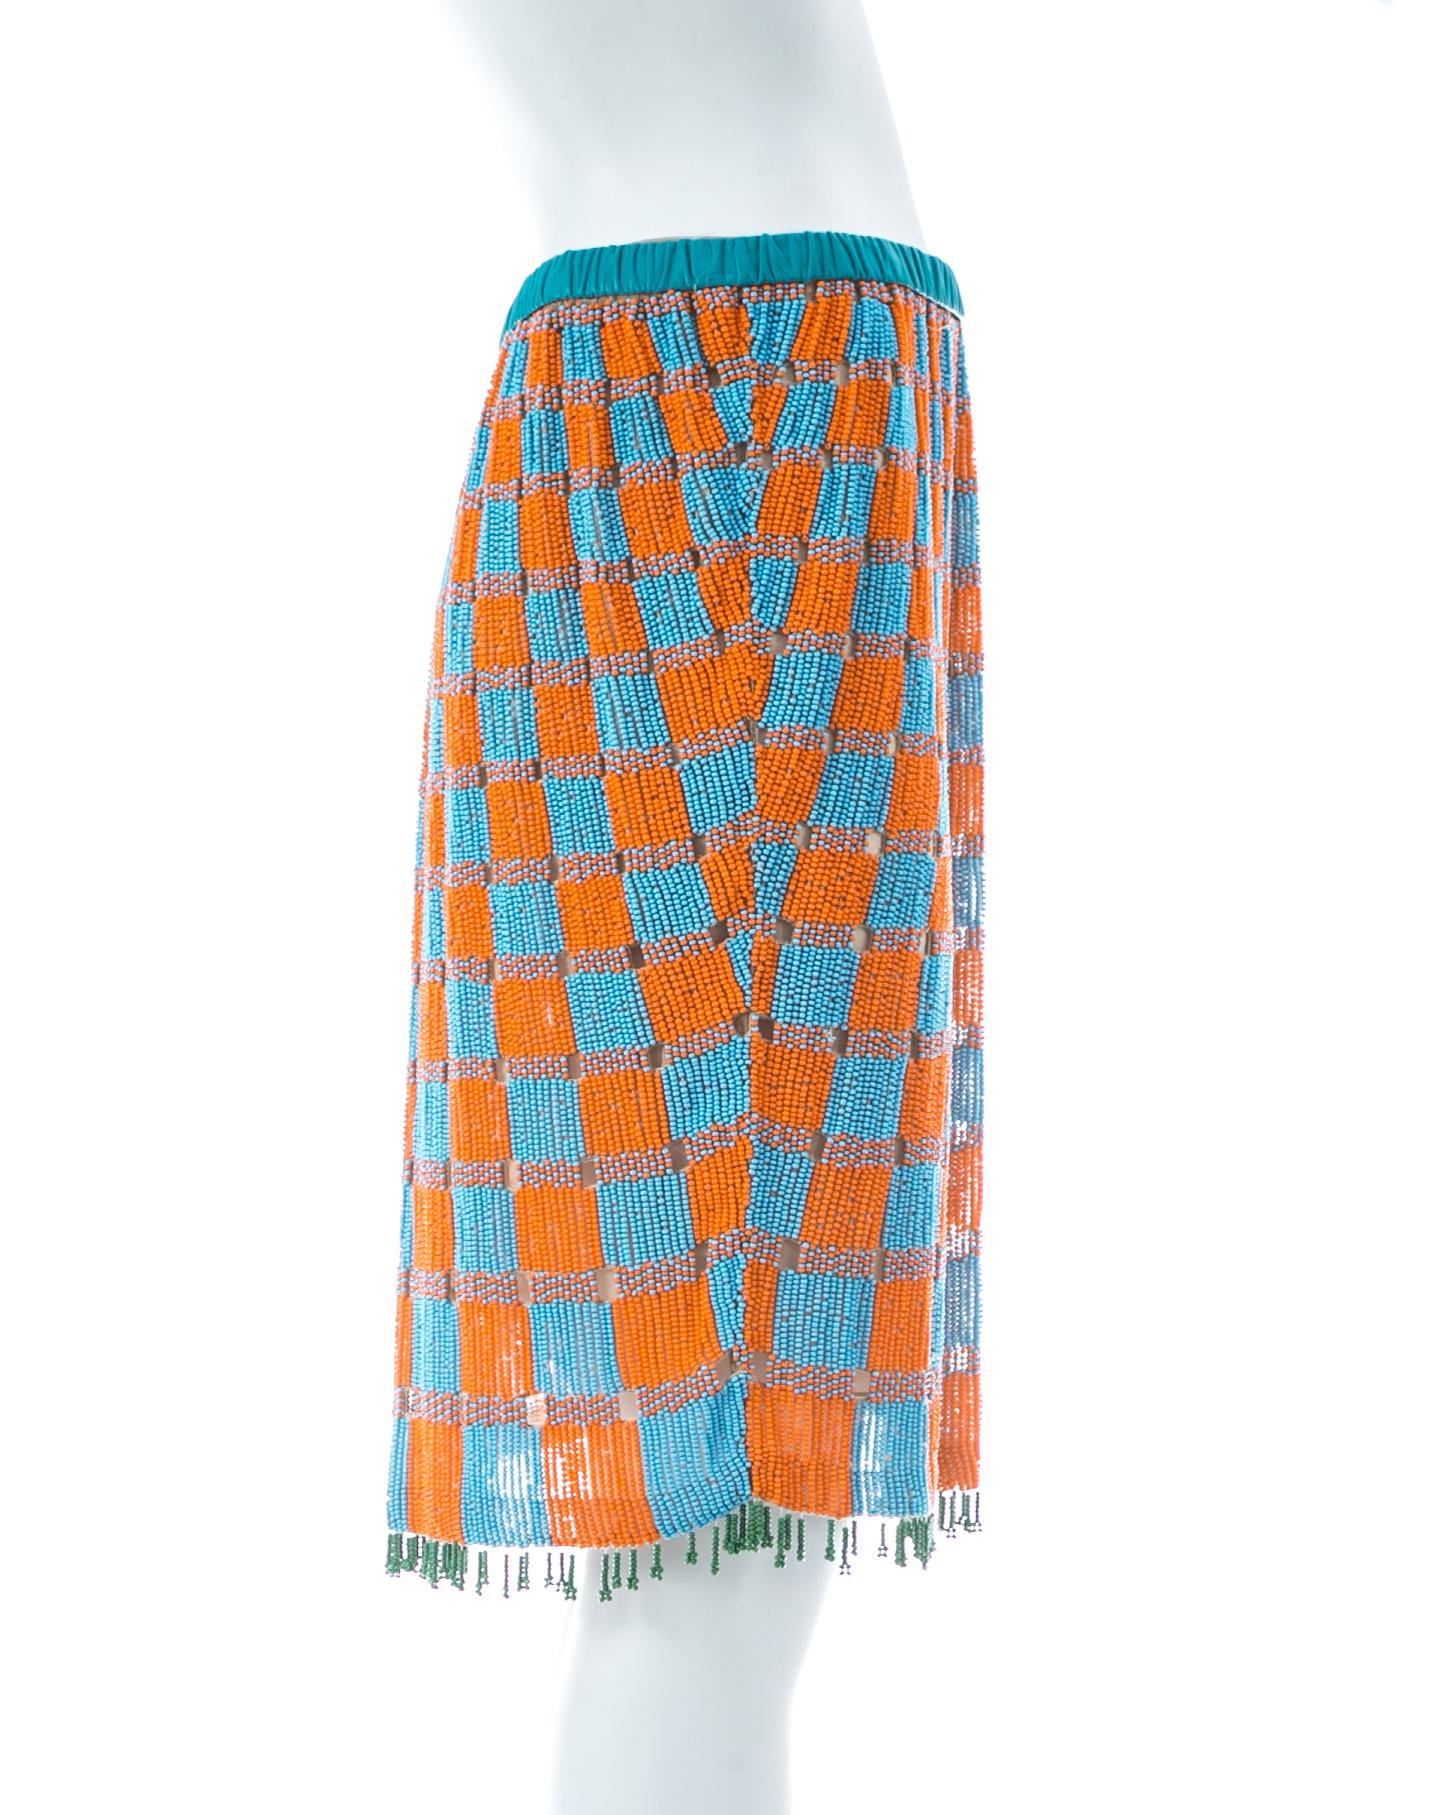 Women's Gucci by Tom Ford orange and blue beaded fringed silk skirt, ss 1999